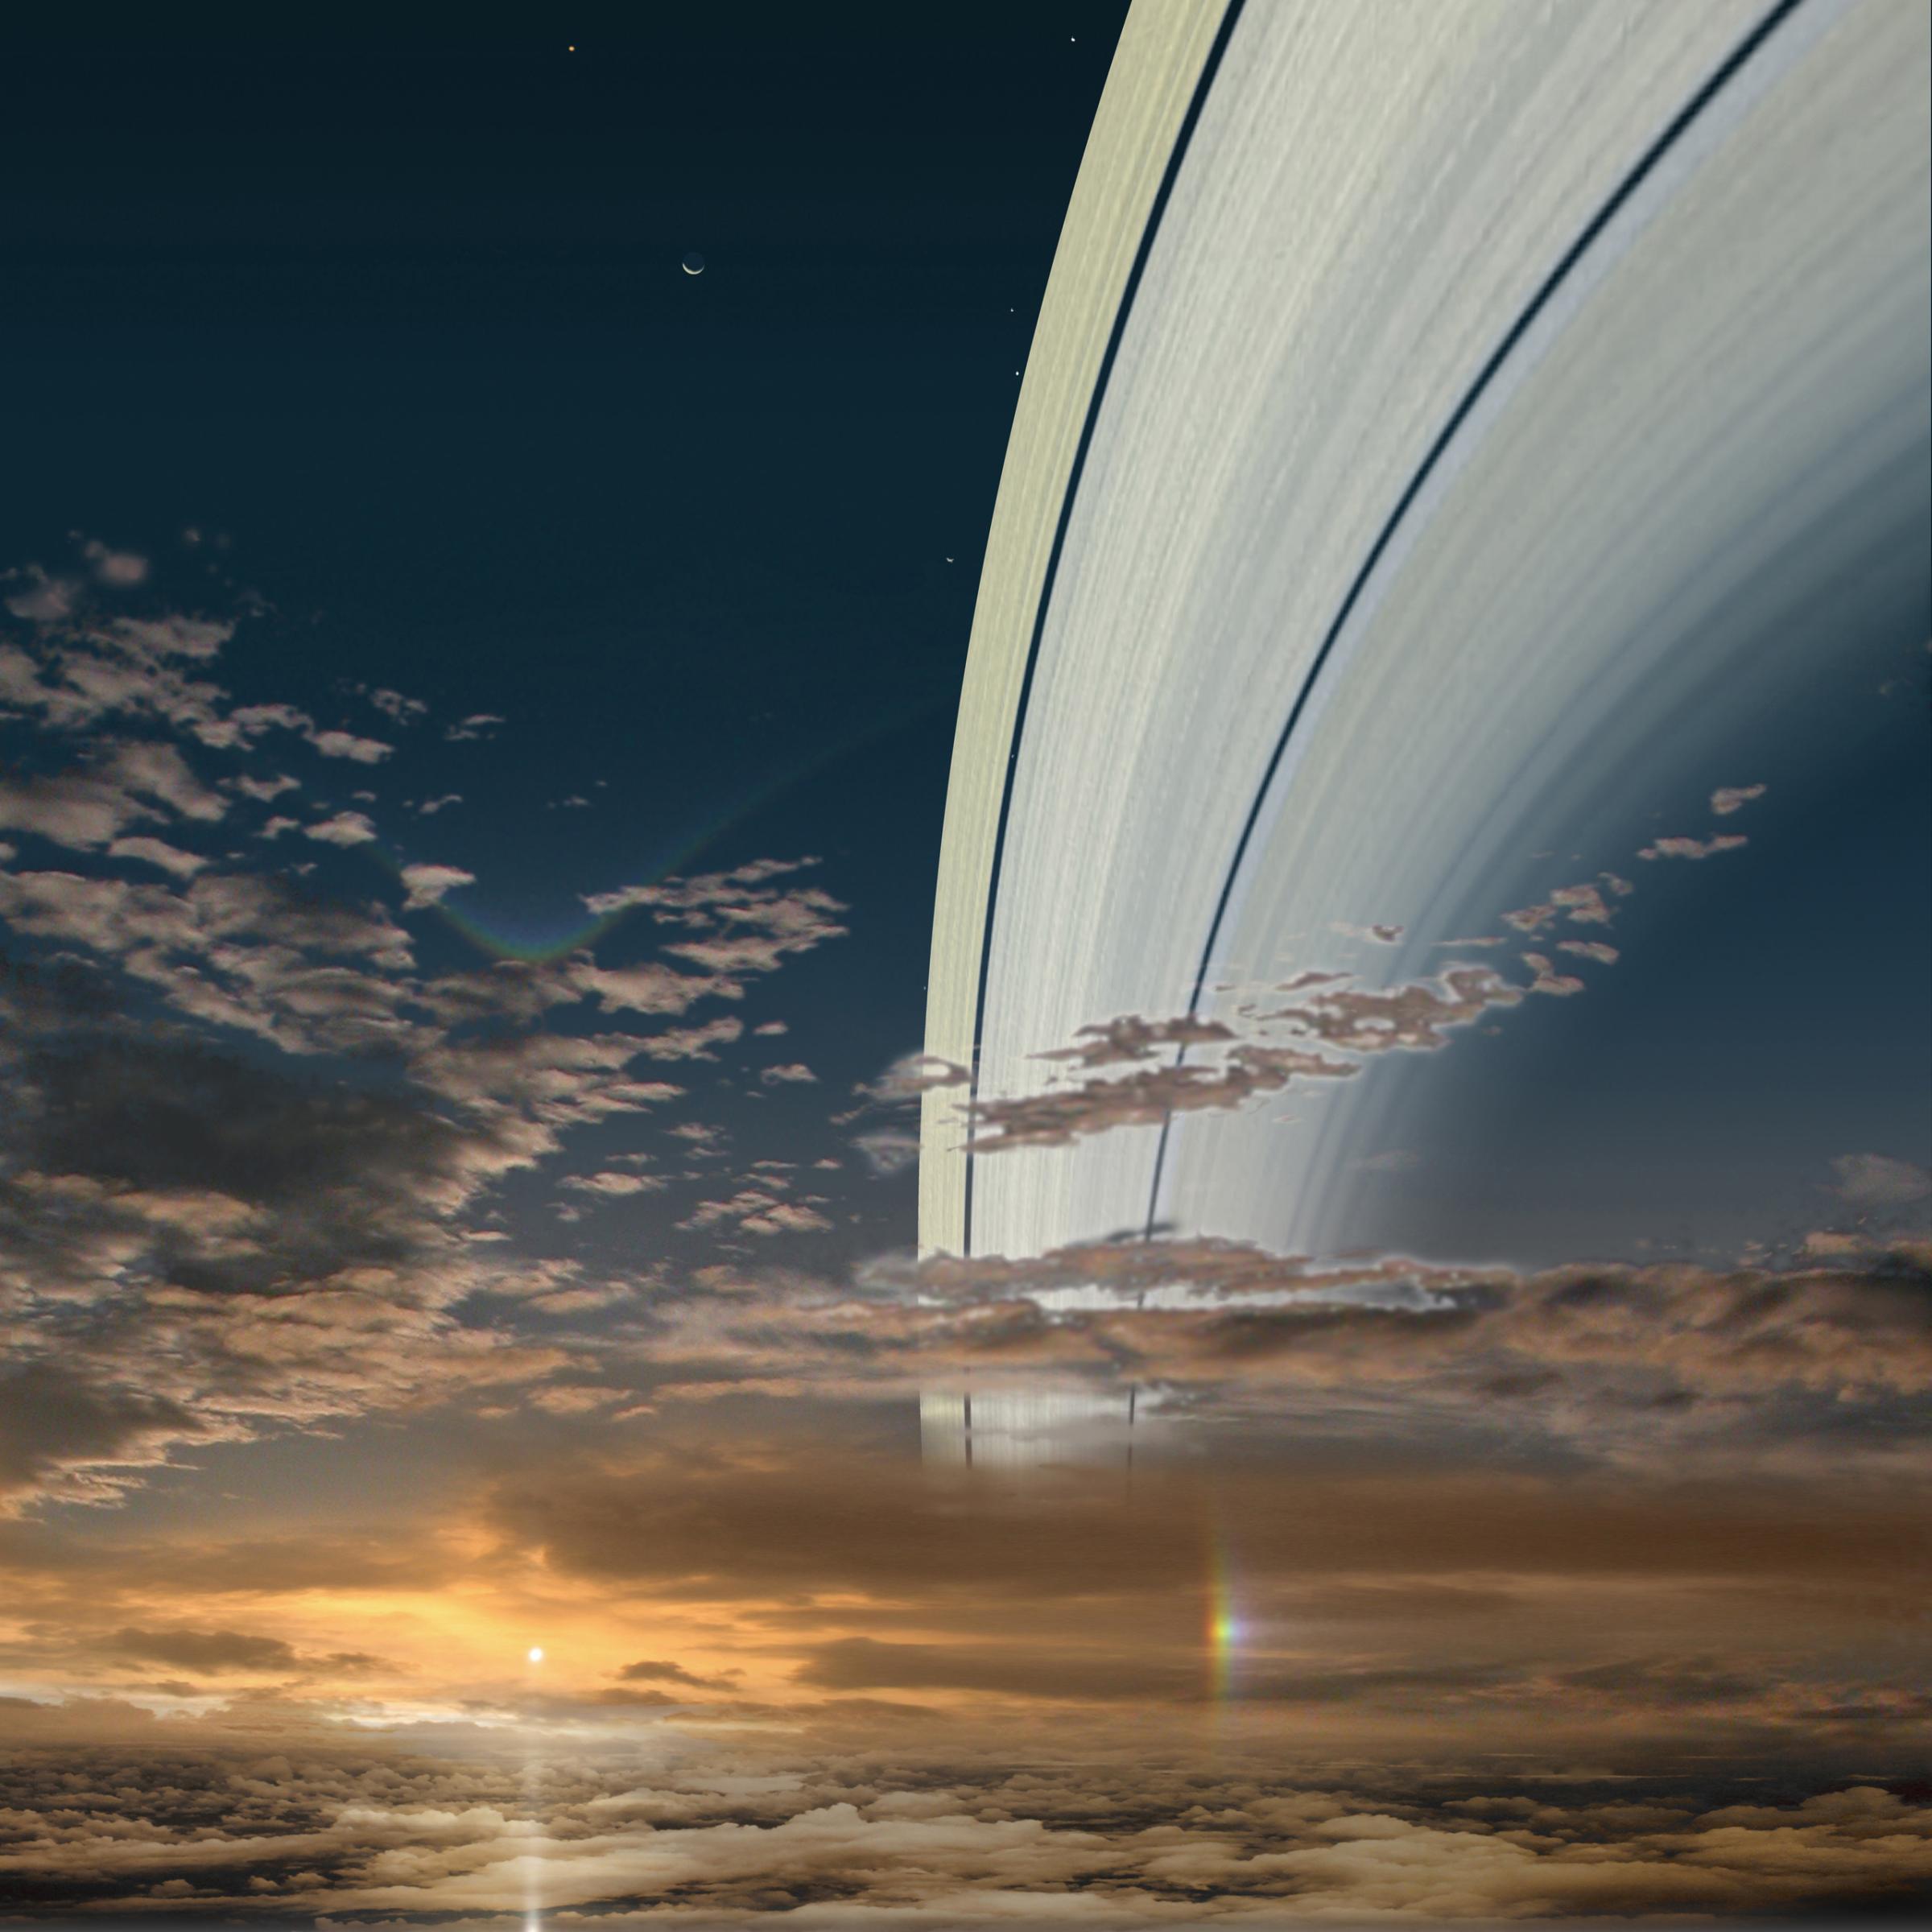 Saturn's rings seen from Saturn